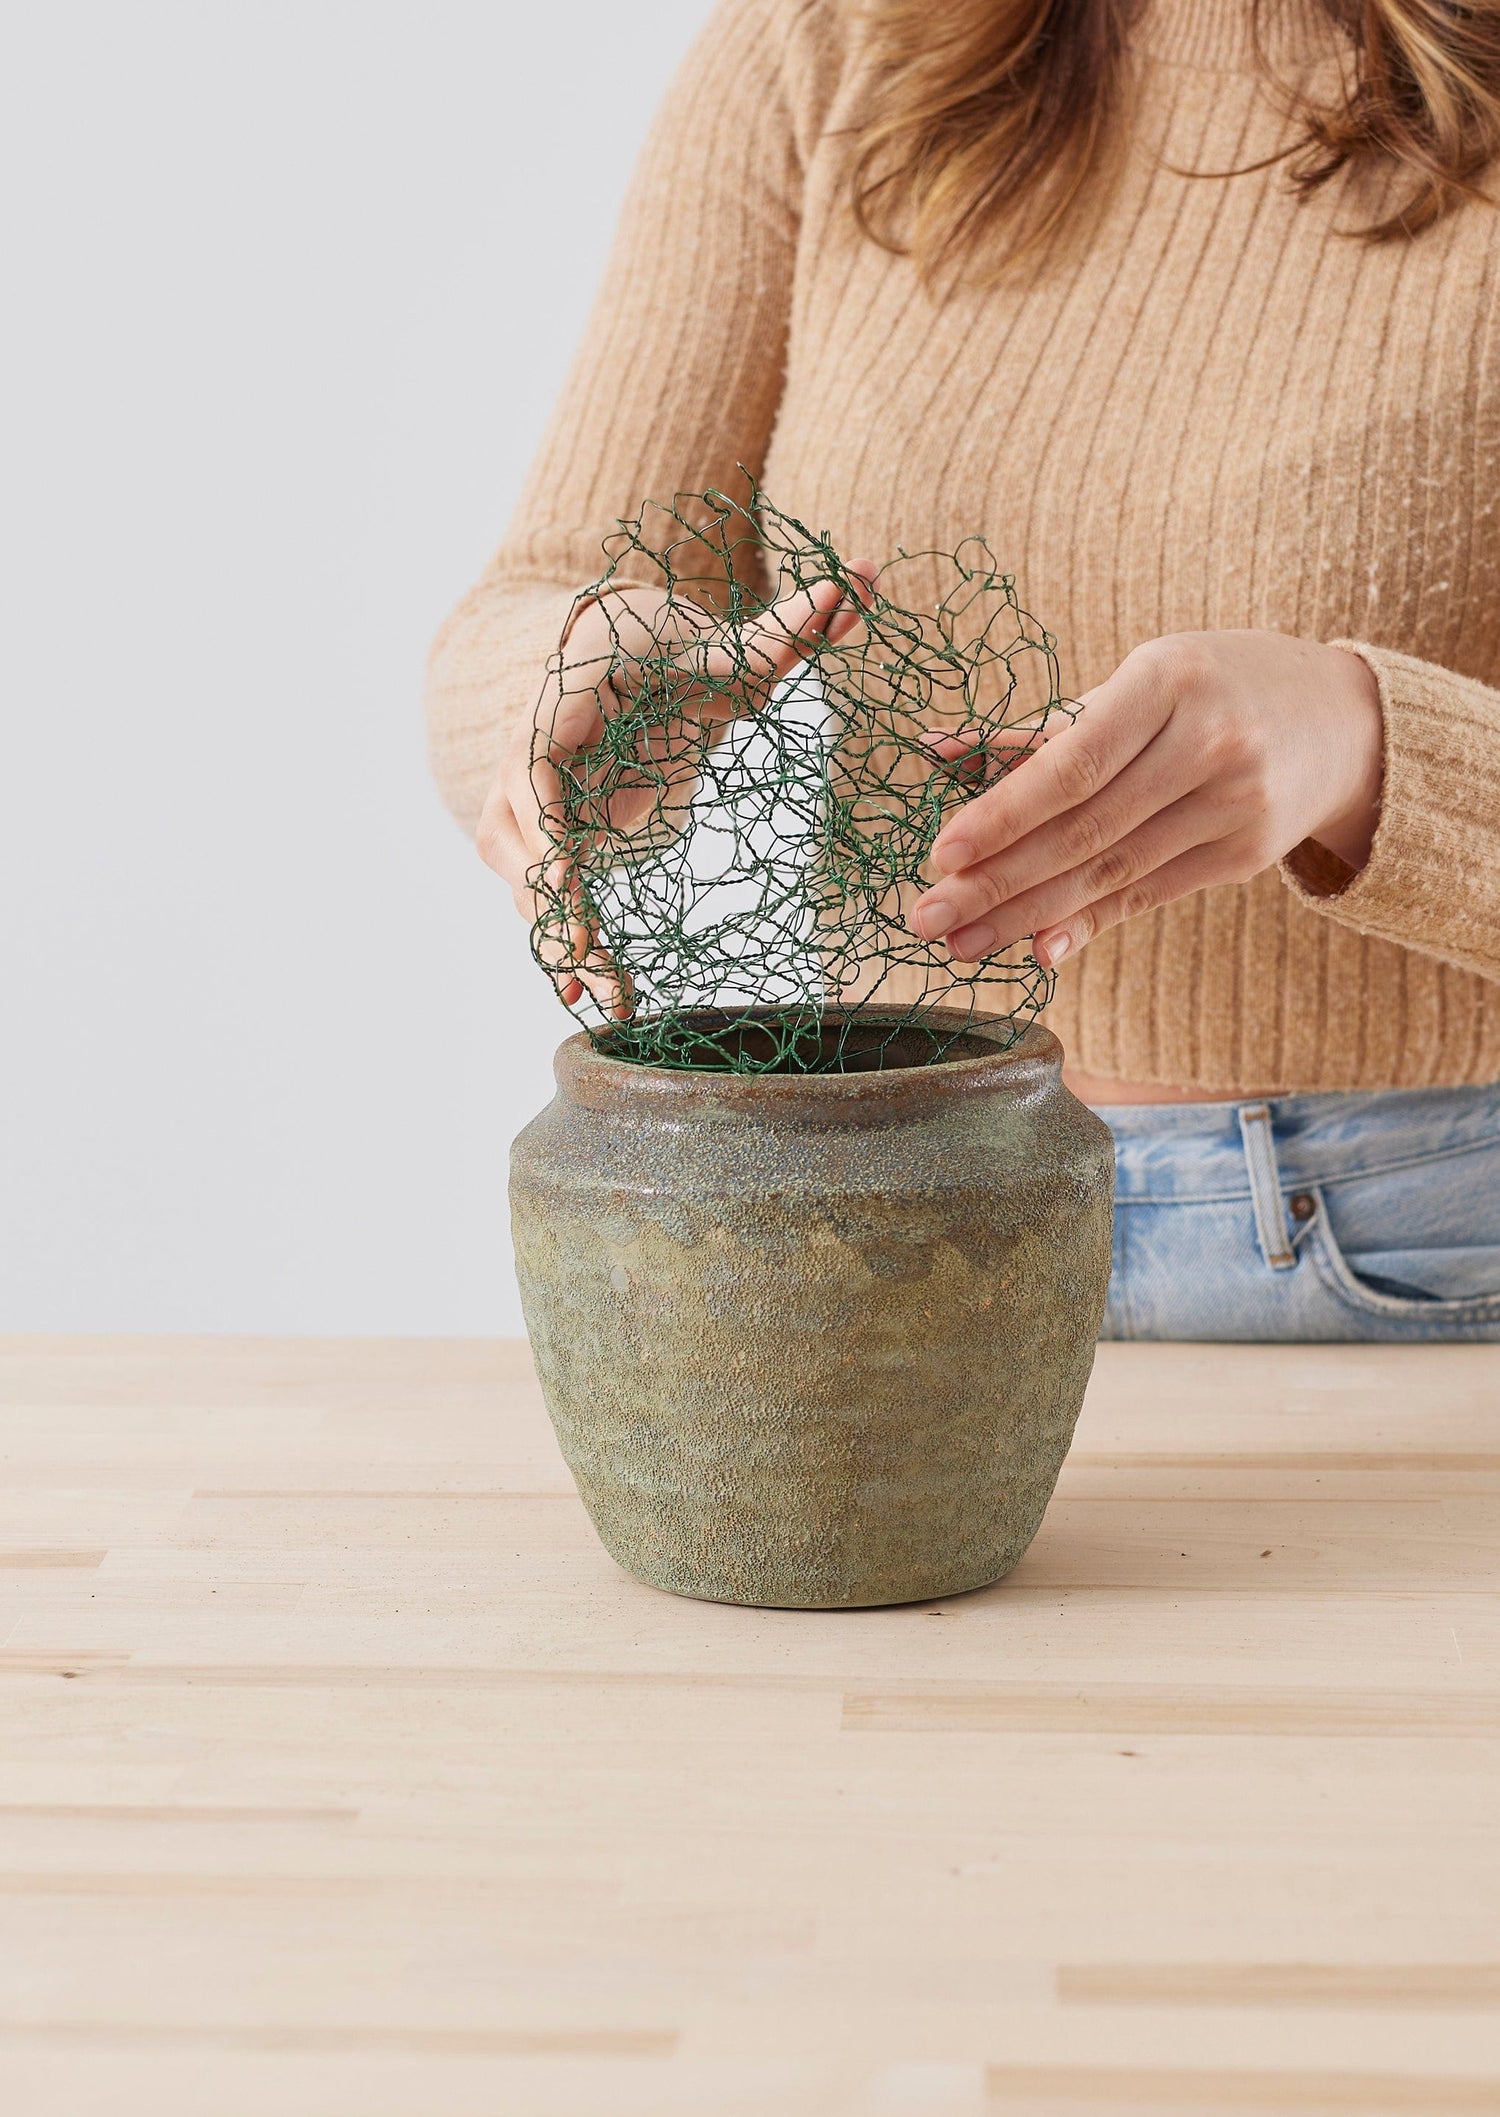 chicken wire floral arranging with planter pot